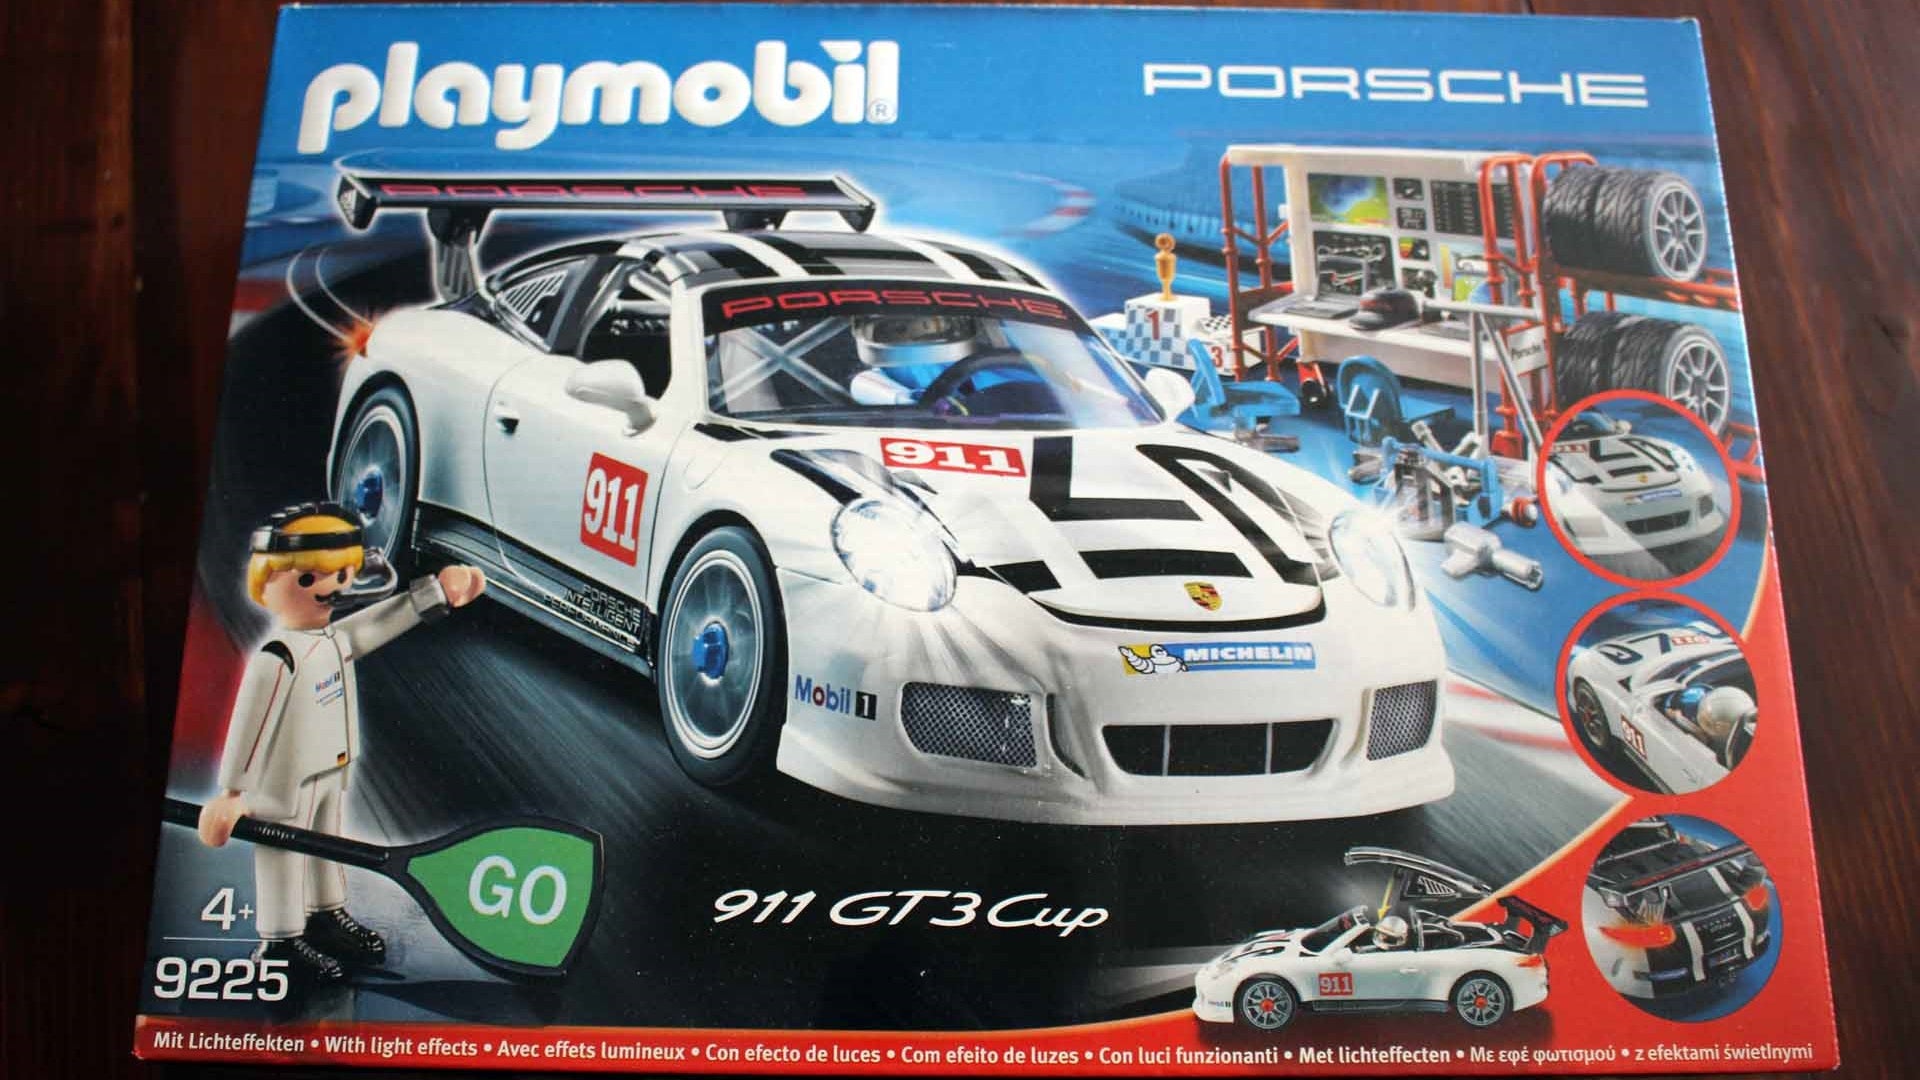 Importing And Building Playmobil's Porsche GT3 Cup